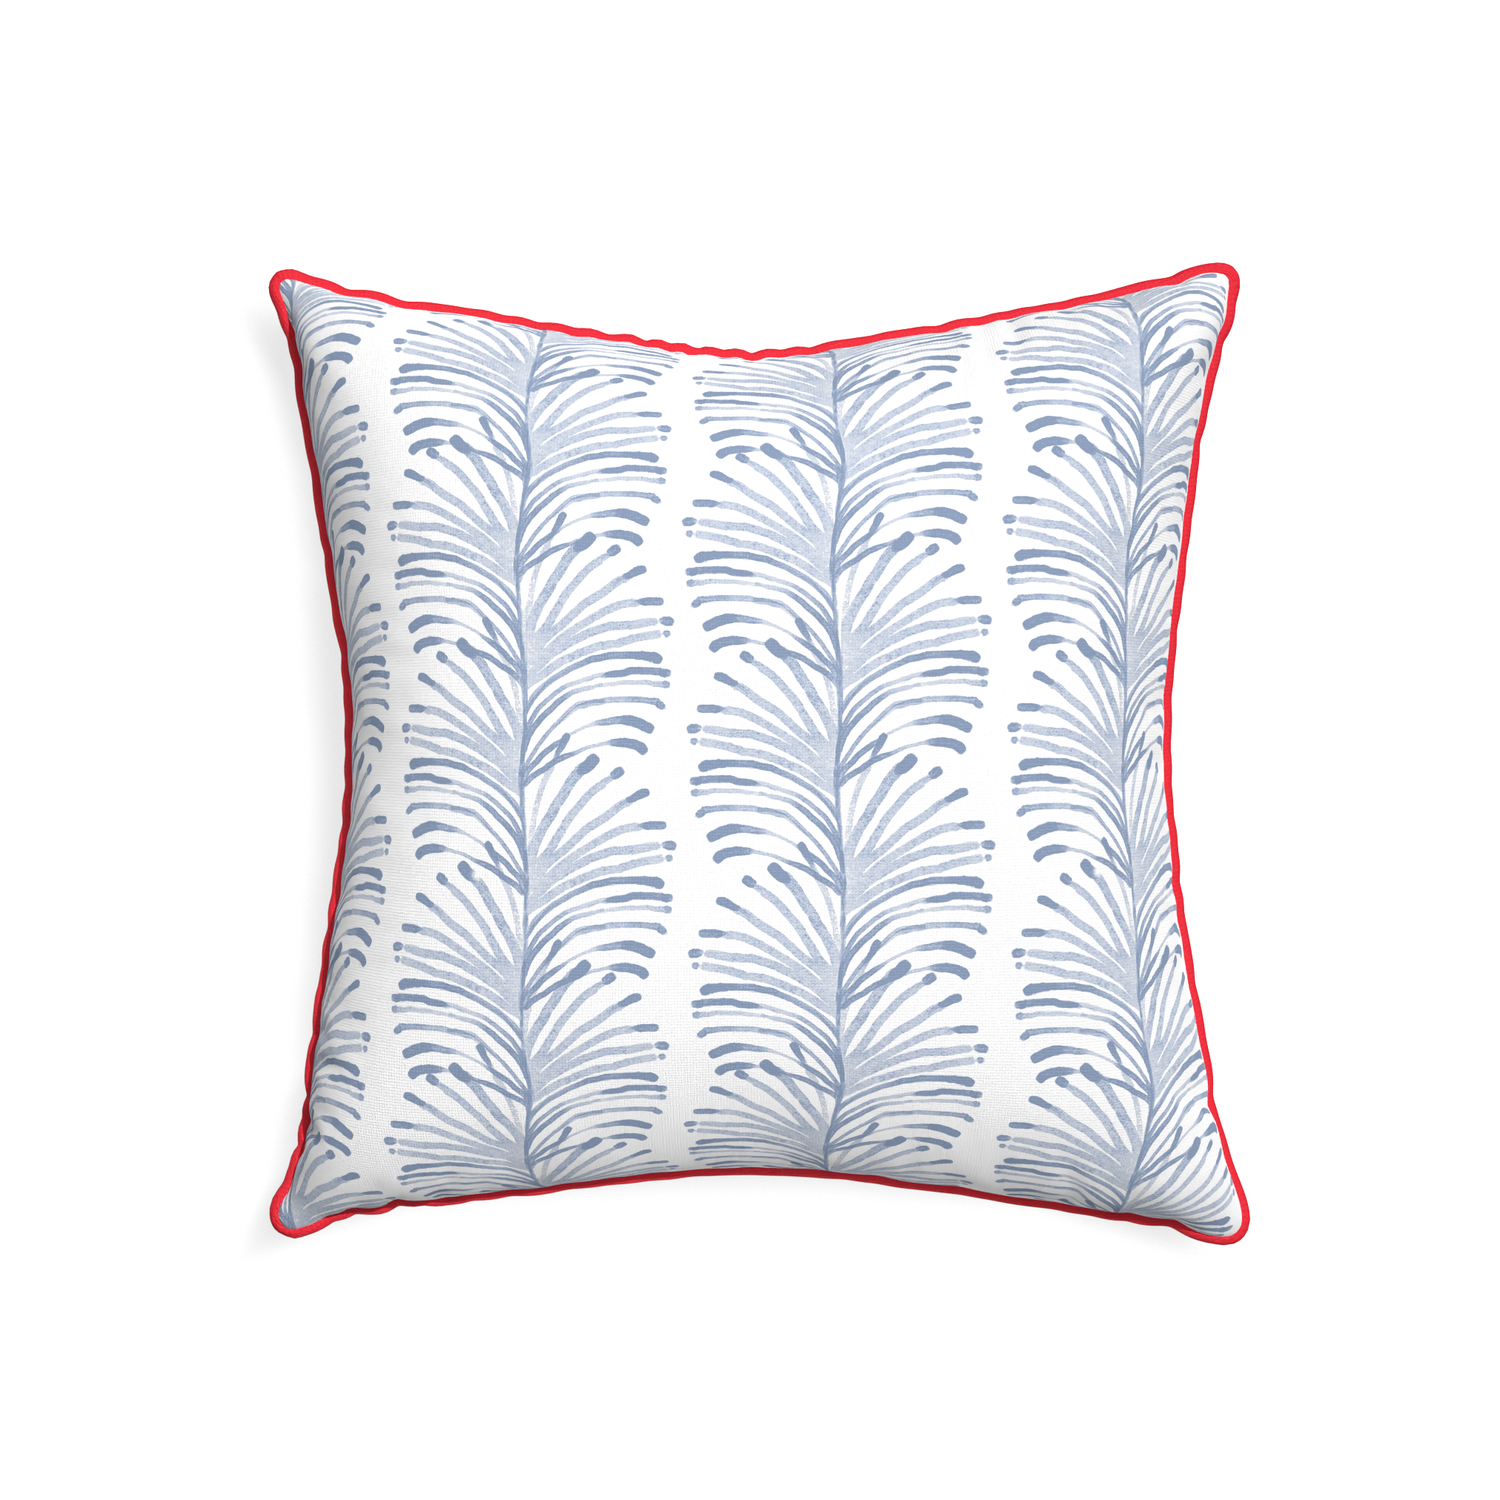 22-square emma sky custom pillow with cherry piping on white background